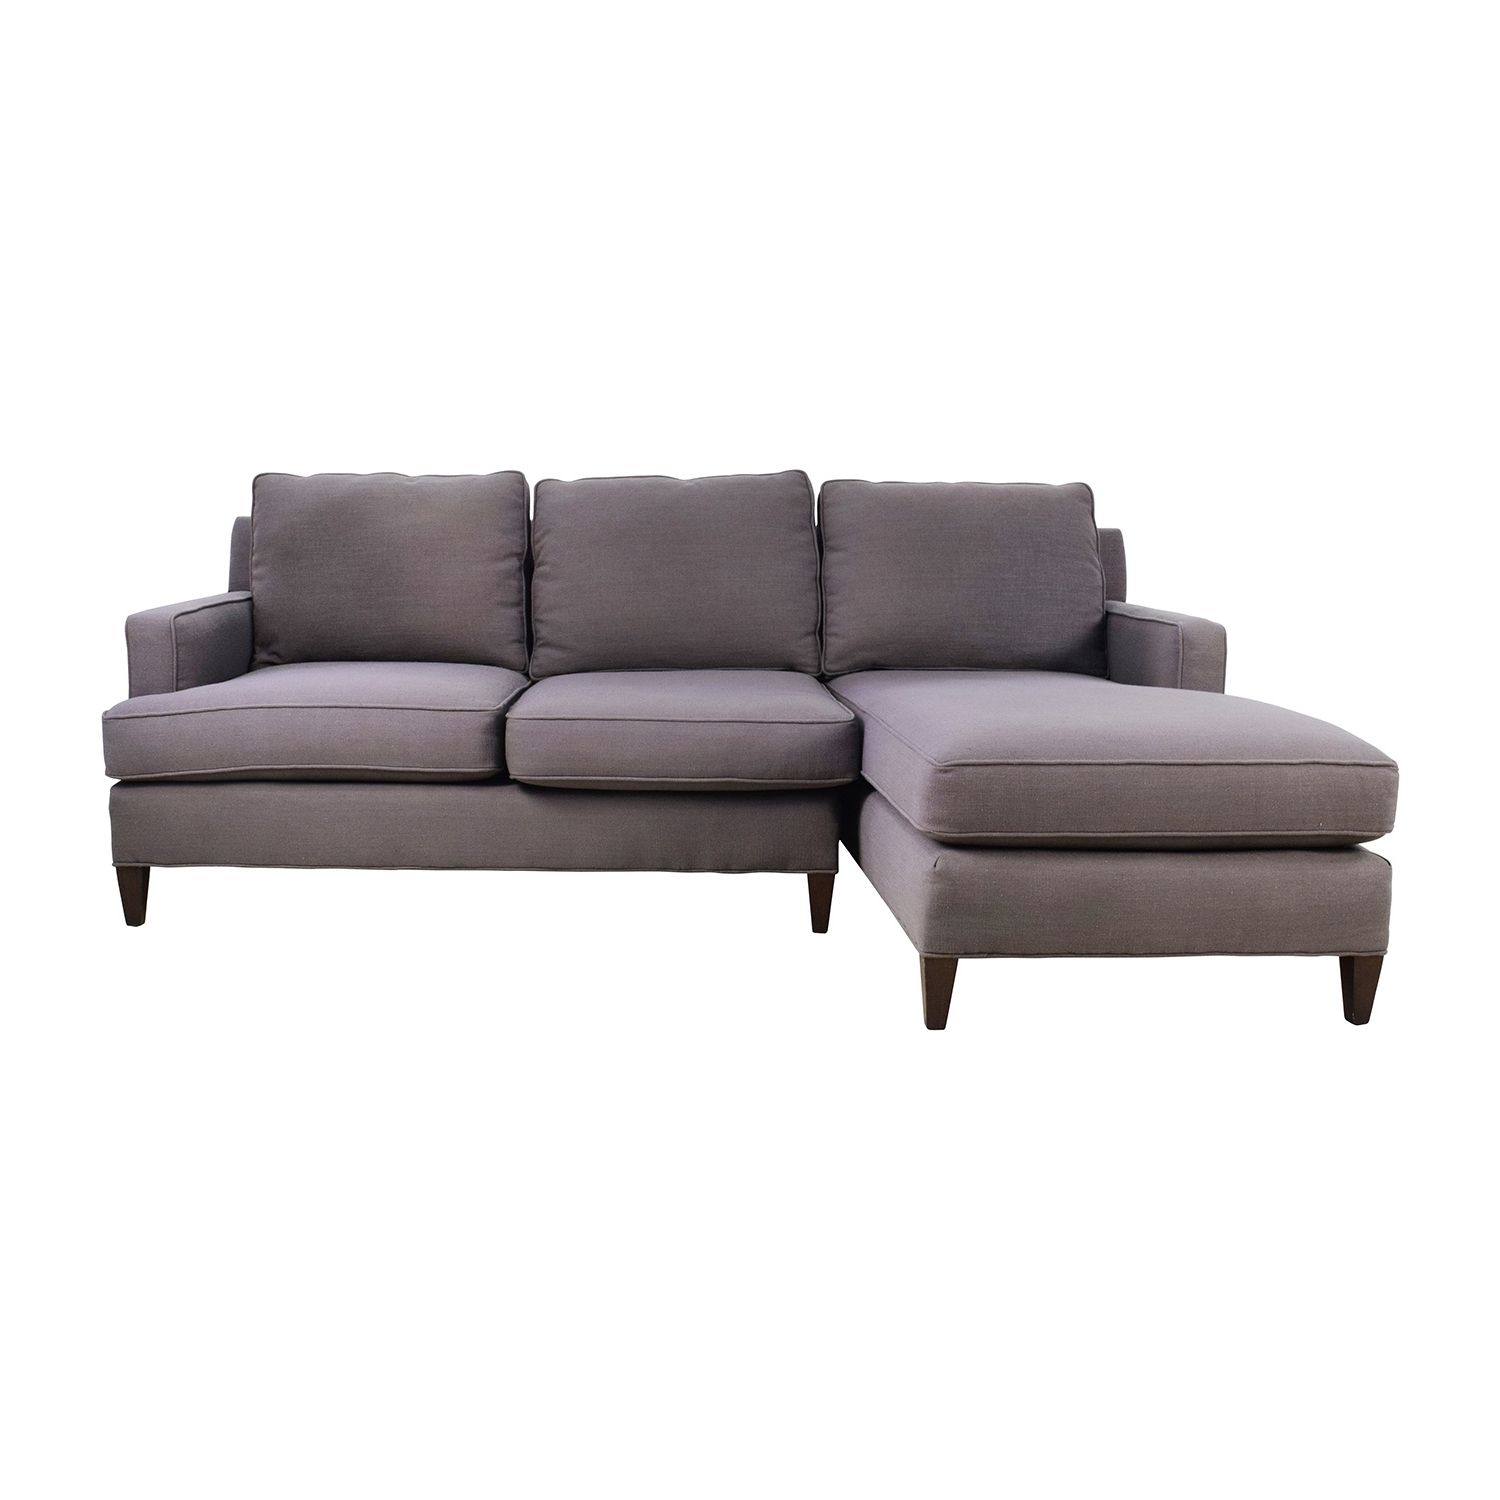 [%81% Off – Mitchell Gold & Bob Williams Mitchell Gold + Bob Regarding Well Known Sectional Sofas At Charlotte Nc|sectional Sofas At Charlotte Nc Pertaining To Latest 81% Off – Mitchell Gold & Bob Williams Mitchell Gold + Bob|best And Newest Sectional Sofas At Charlotte Nc Inside 81% Off – Mitchell Gold & Bob Williams Mitchell Gold + Bob|newest 81% Off – Mitchell Gold & Bob Williams Mitchell Gold + Bob Pertaining To Sectional Sofas At Charlotte Nc%] (Photo 15 of 15)